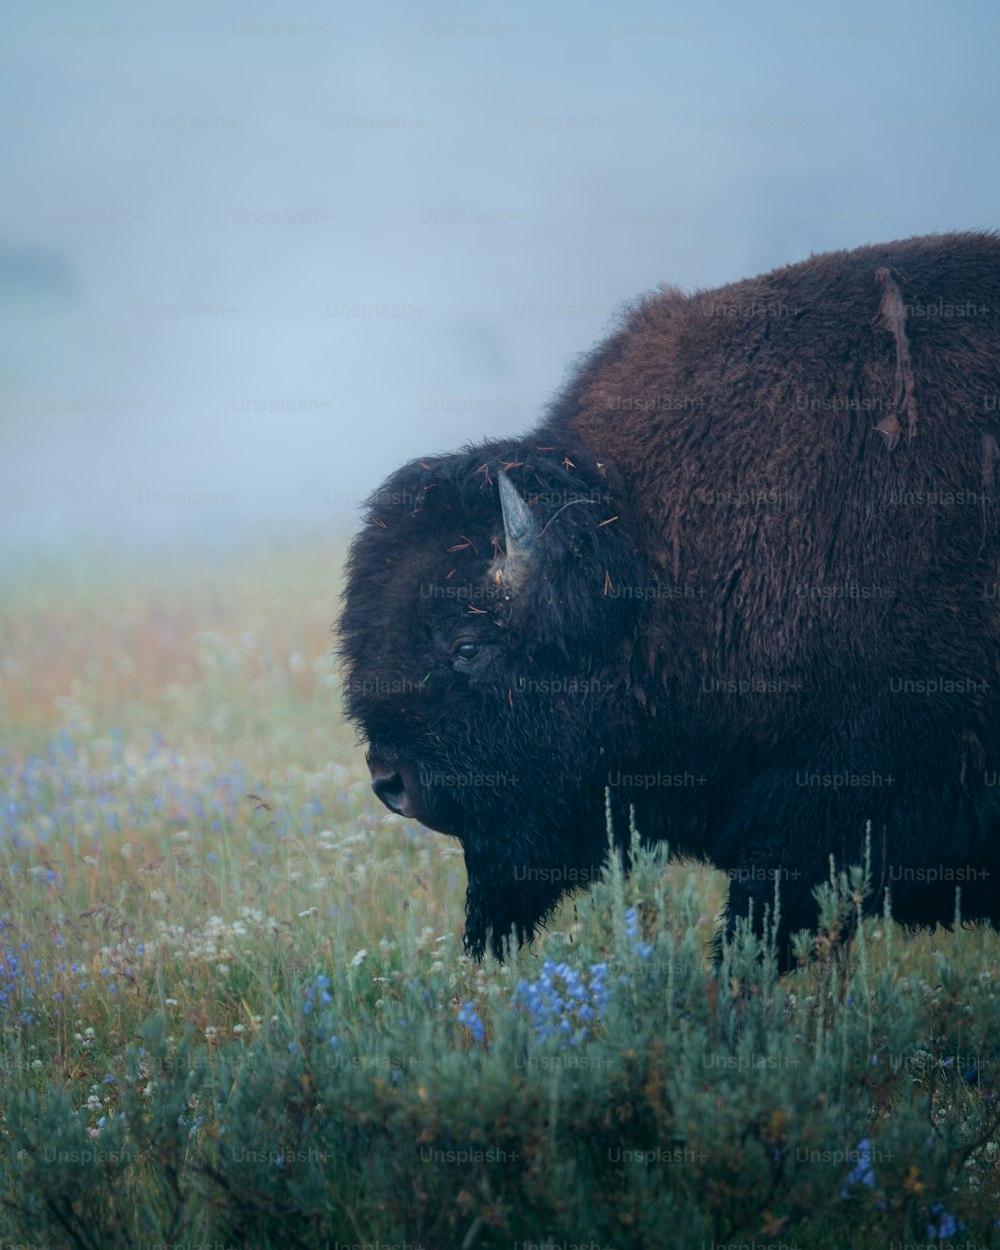 a bison standing in a field of grass and flowers